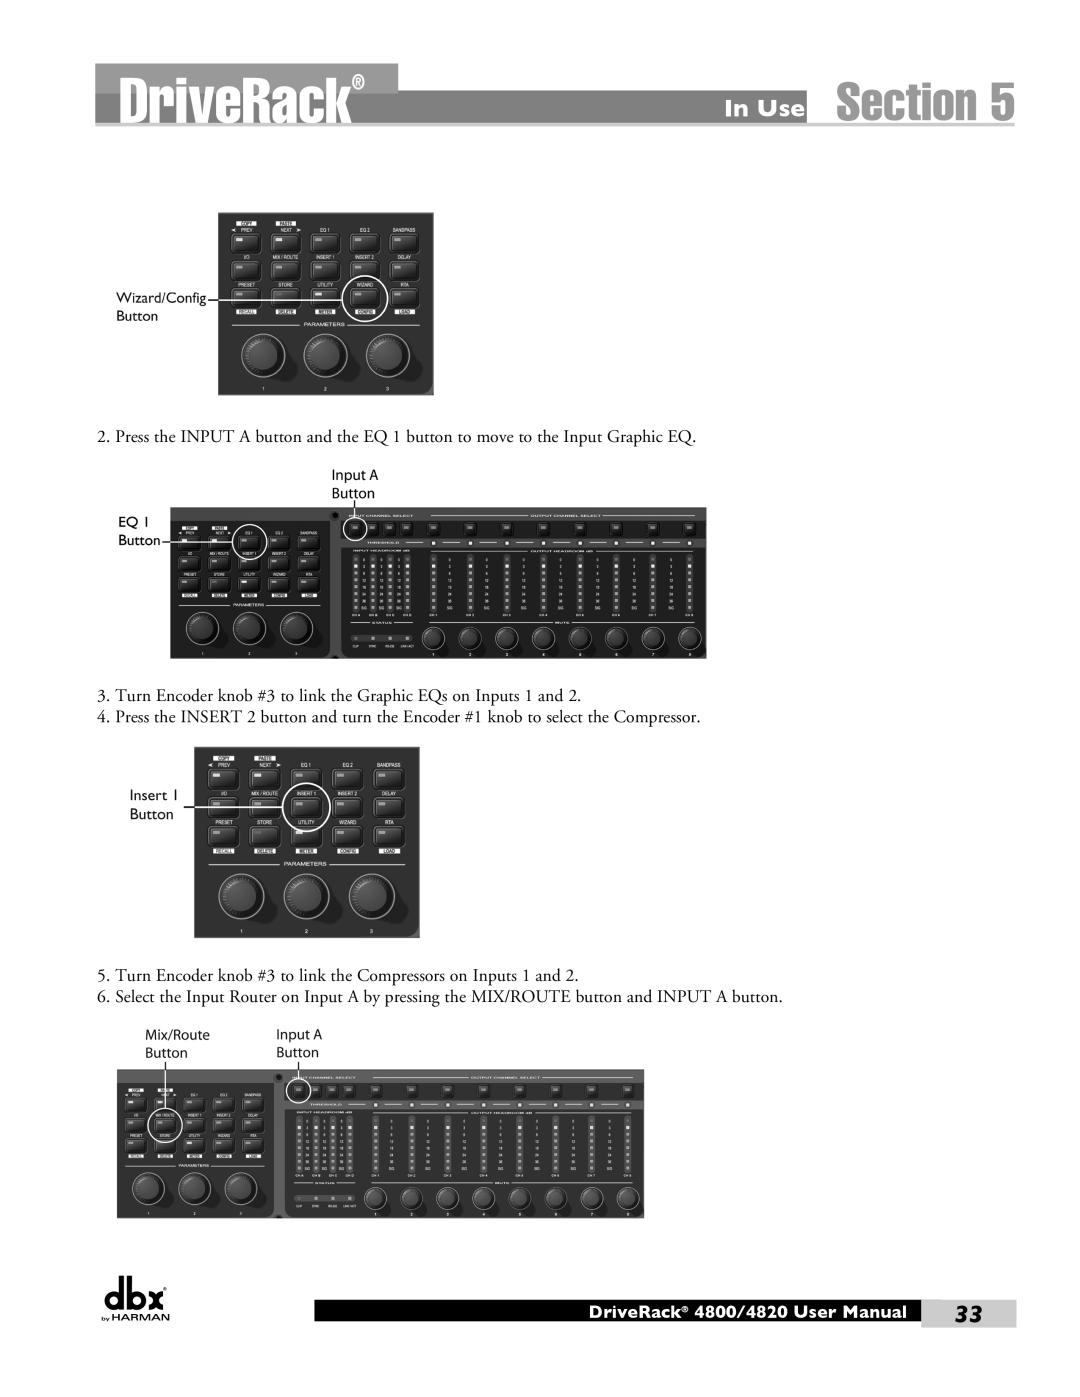 Harman 4820, 4800 DriveRack, Section, In Use, Press the Input A button and the EQ 1 button to move to the Input Graphic EQ 